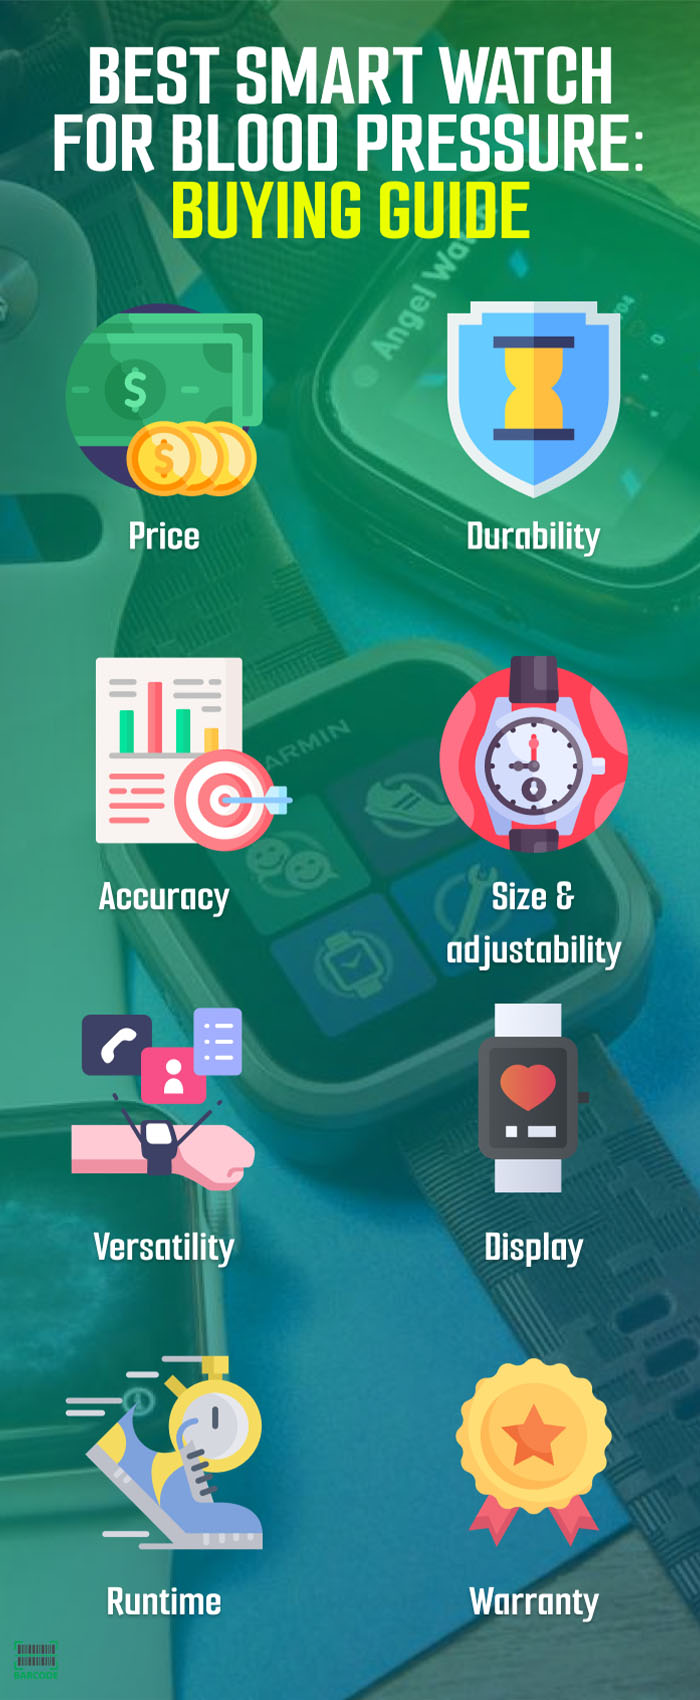 Factors to consider when buying the best blood pressure smart watch